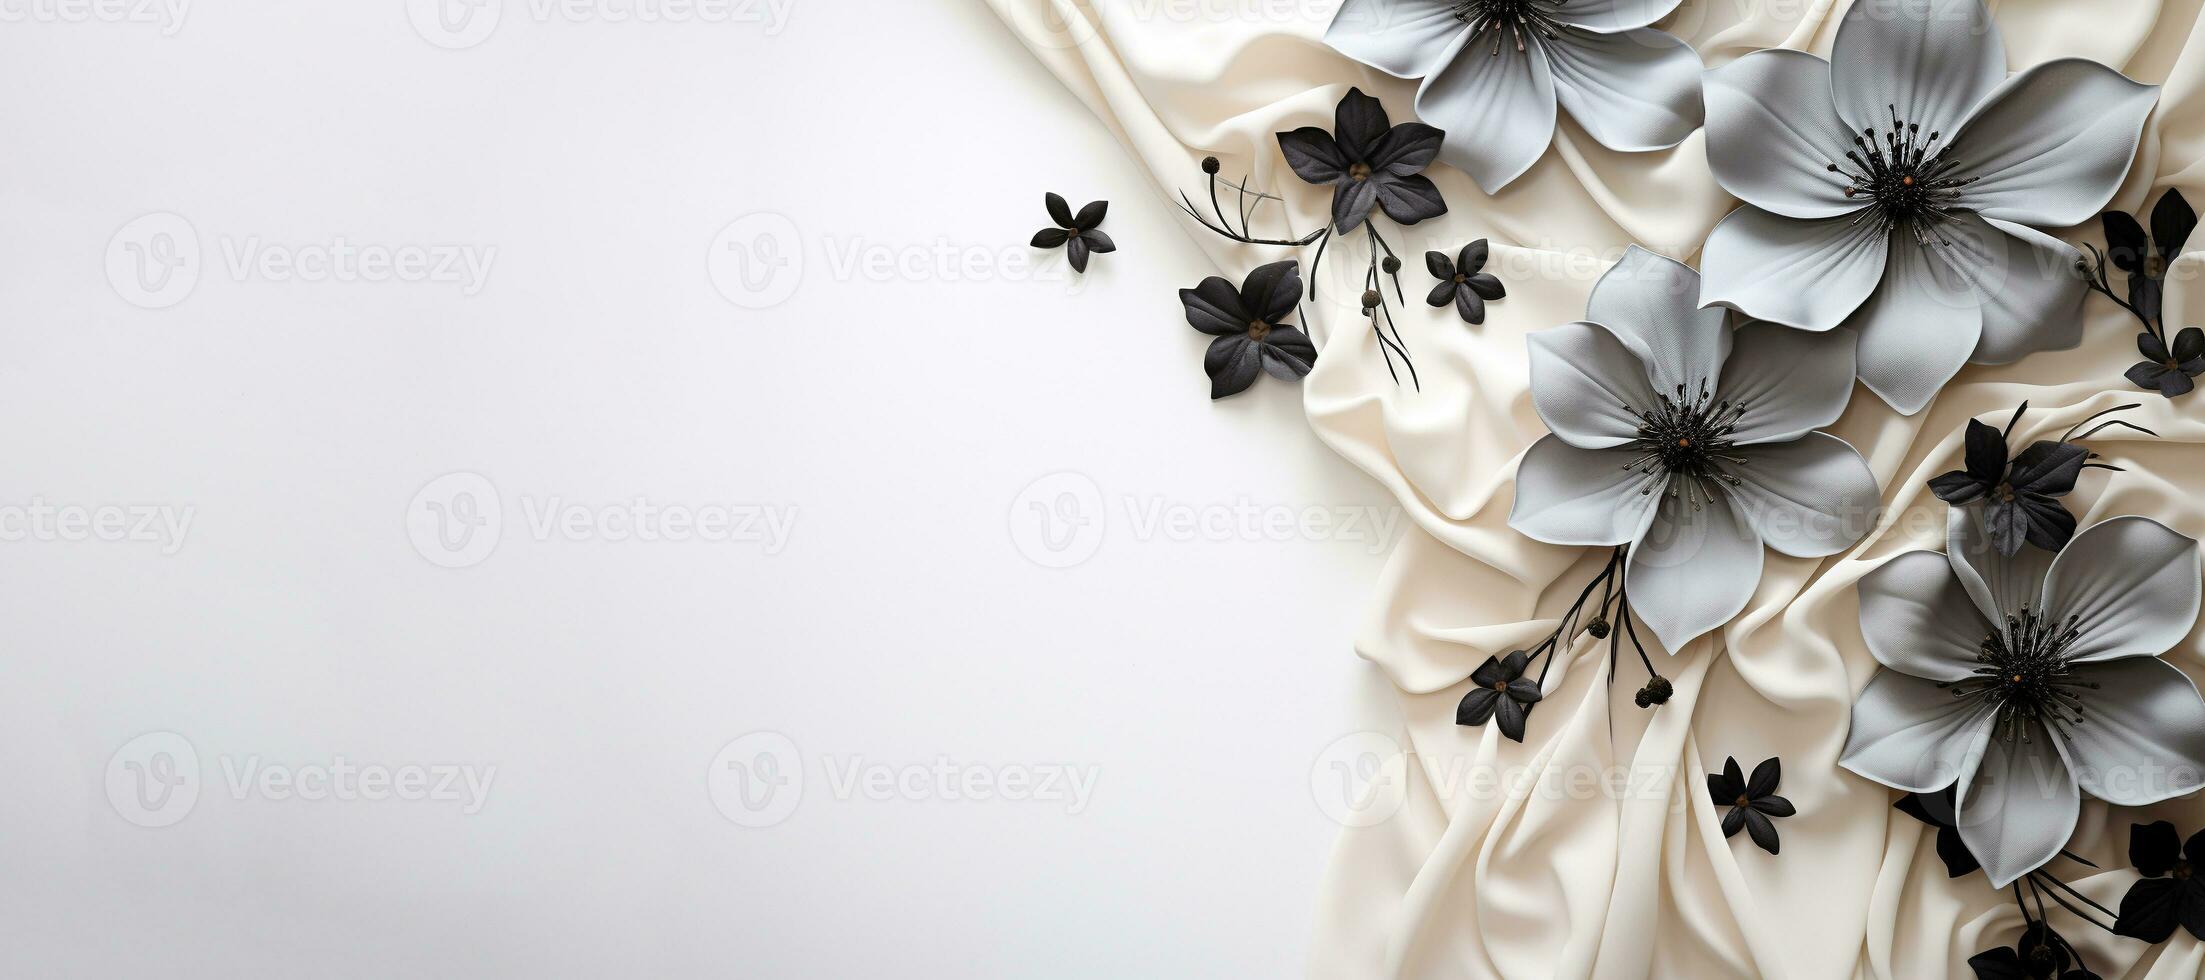 AI generated Mockup image close up flowers and silk on white fabric background. Banner, card, invitation and branding design concept photo